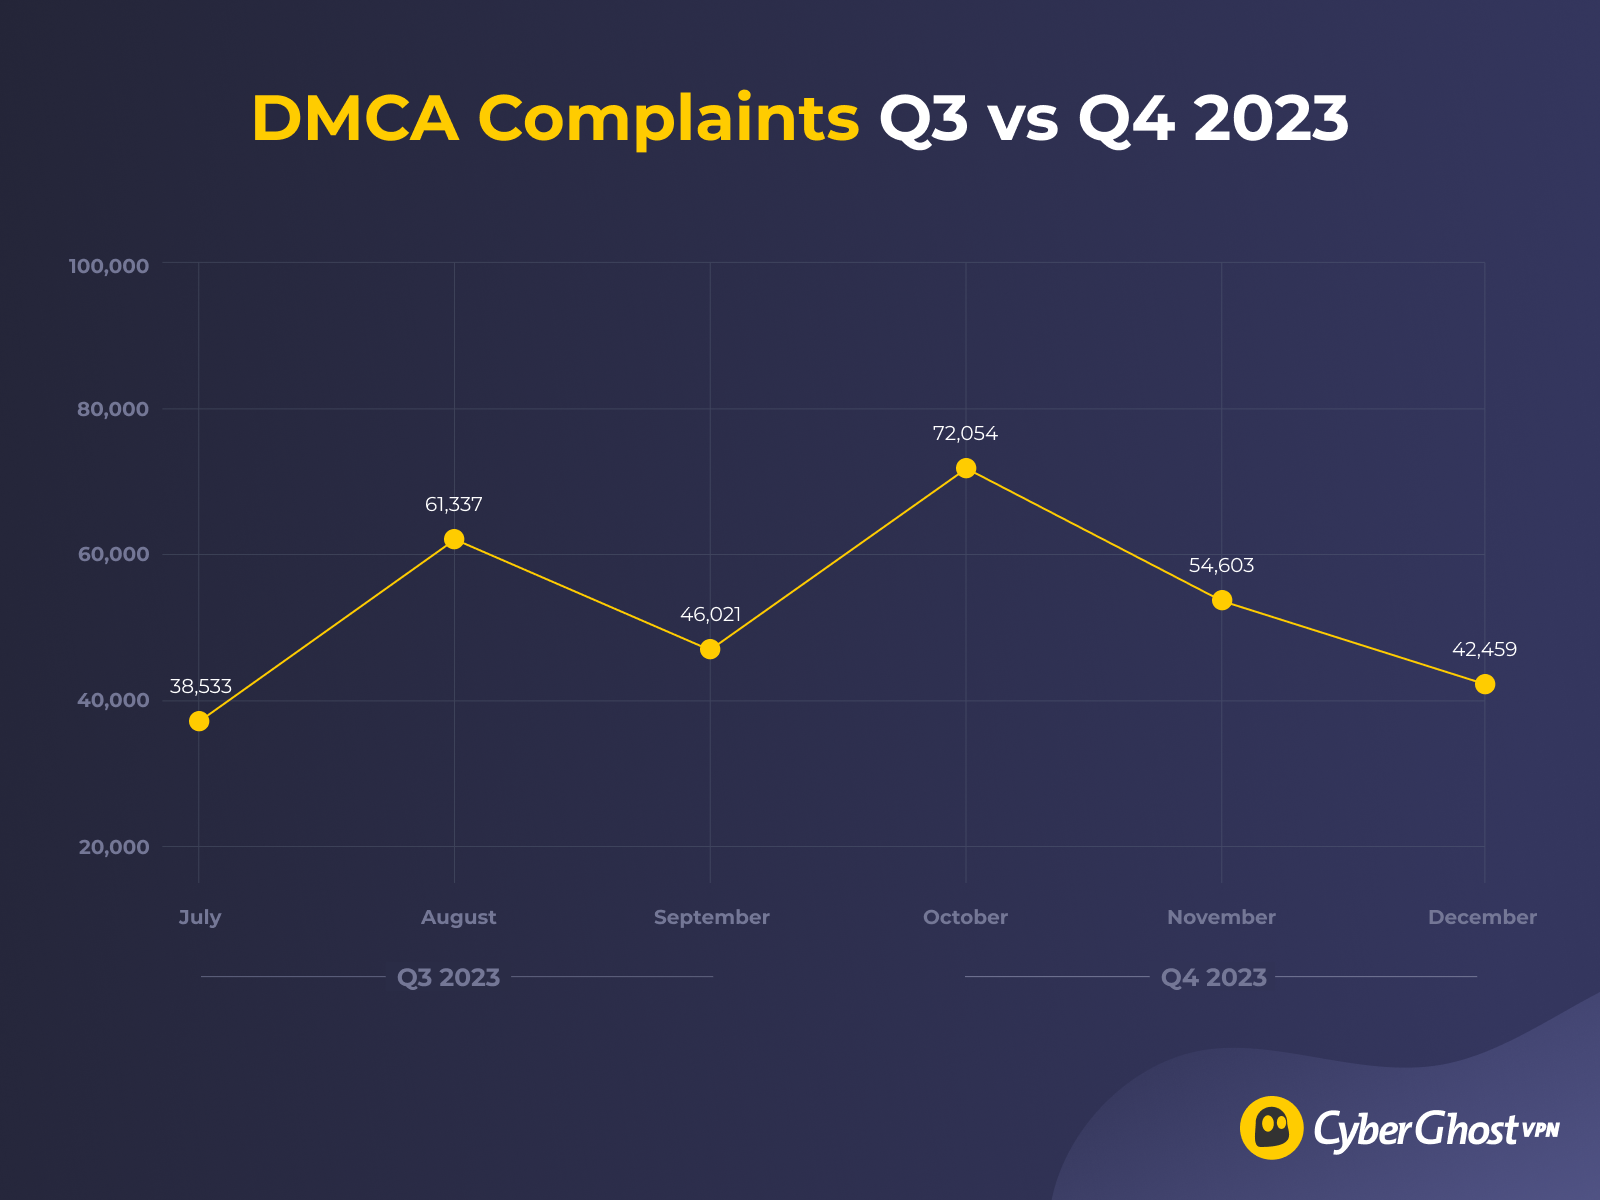 CyberGhost VPN's Quarterly Transparency Report numbers for DMCA Complaints Q4 2023